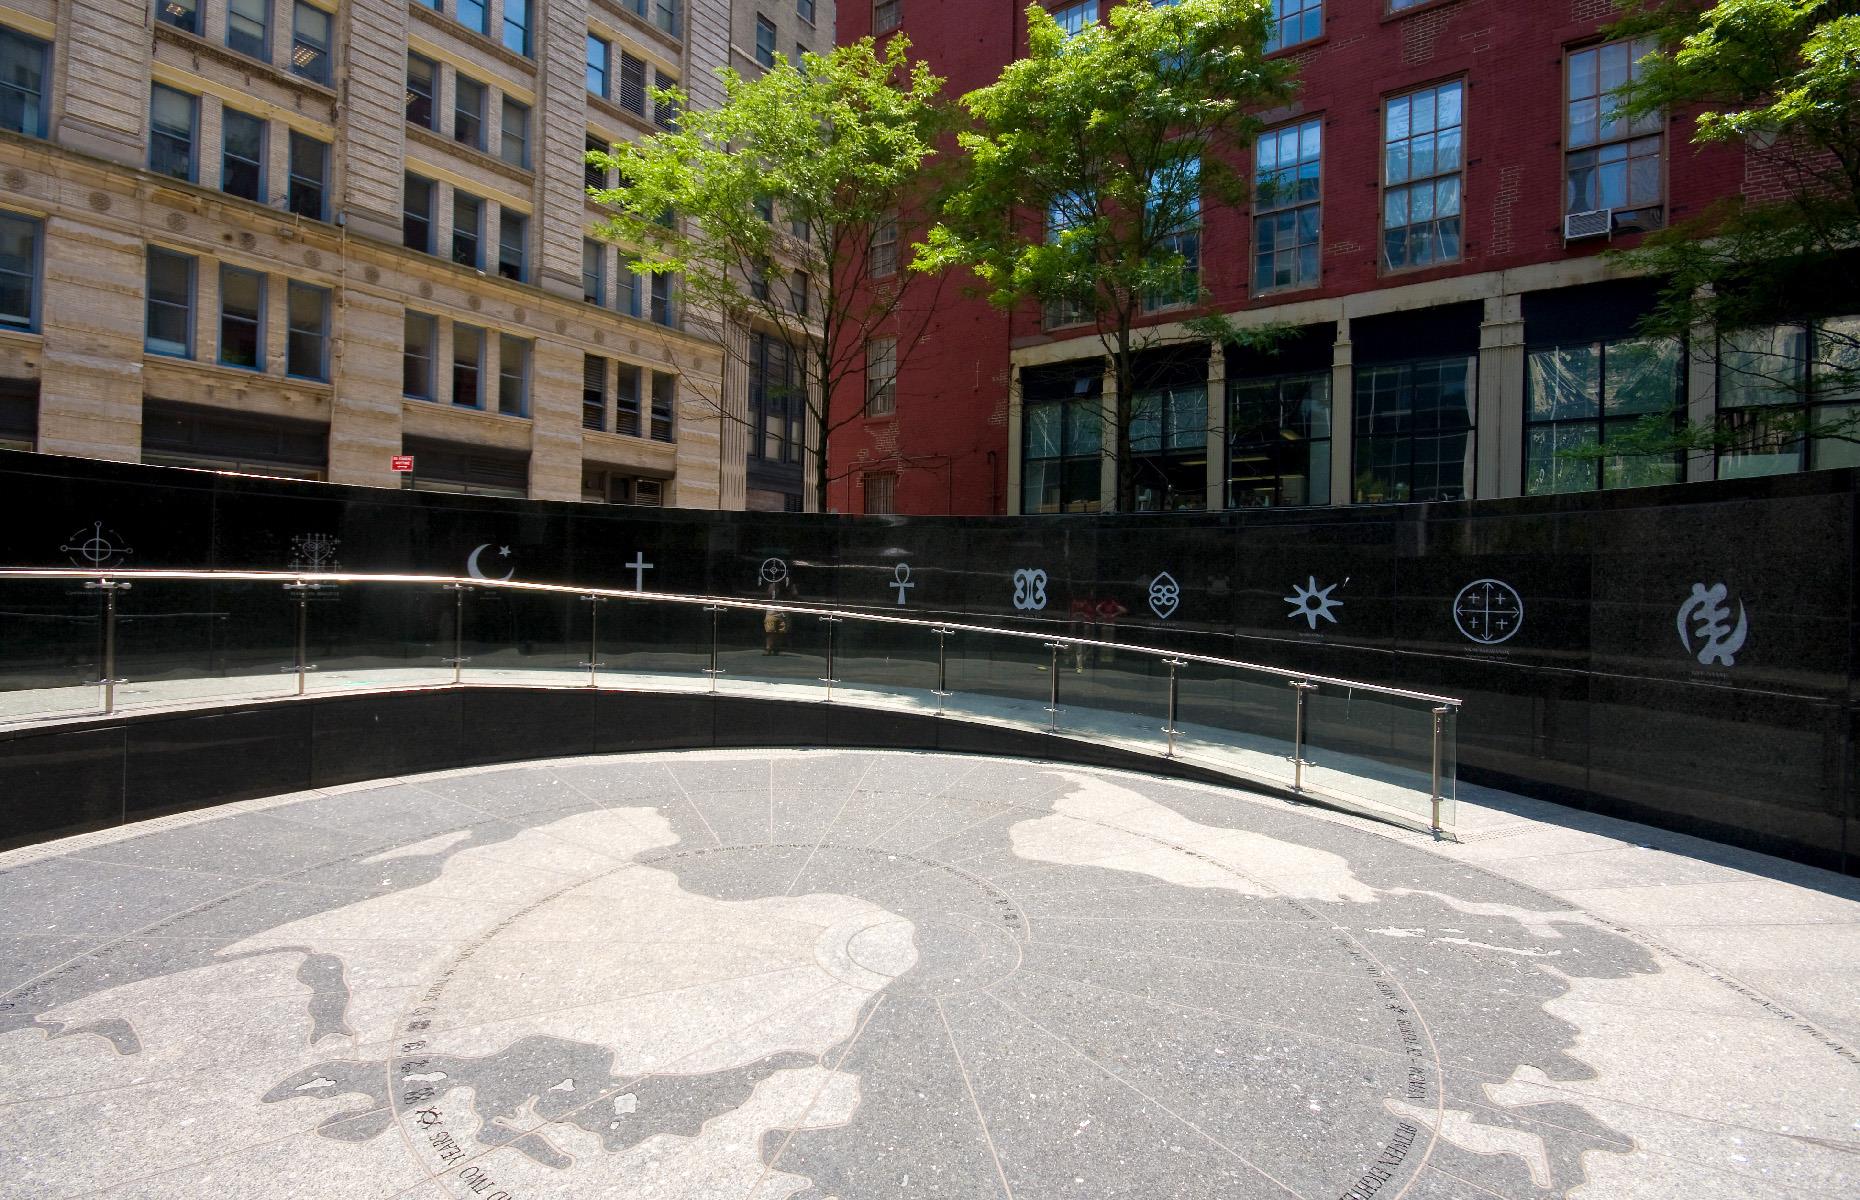 <p>This poignant National Monument in the Big Apple was discovered by accident. The land was being surveyed ahead of the construction of an office tower when human skeletal remains were found some 30 feet below the ground. The site was excavated, revealing a vast burial ground for free and enslaved African Americans that contained around 15,000 intact skeletal remains. Thought to date from the 17th century, it’s the earliest of its kind ever to be rediscovered. Today the site includes a moving memorial and an informative interpretive center.</p>